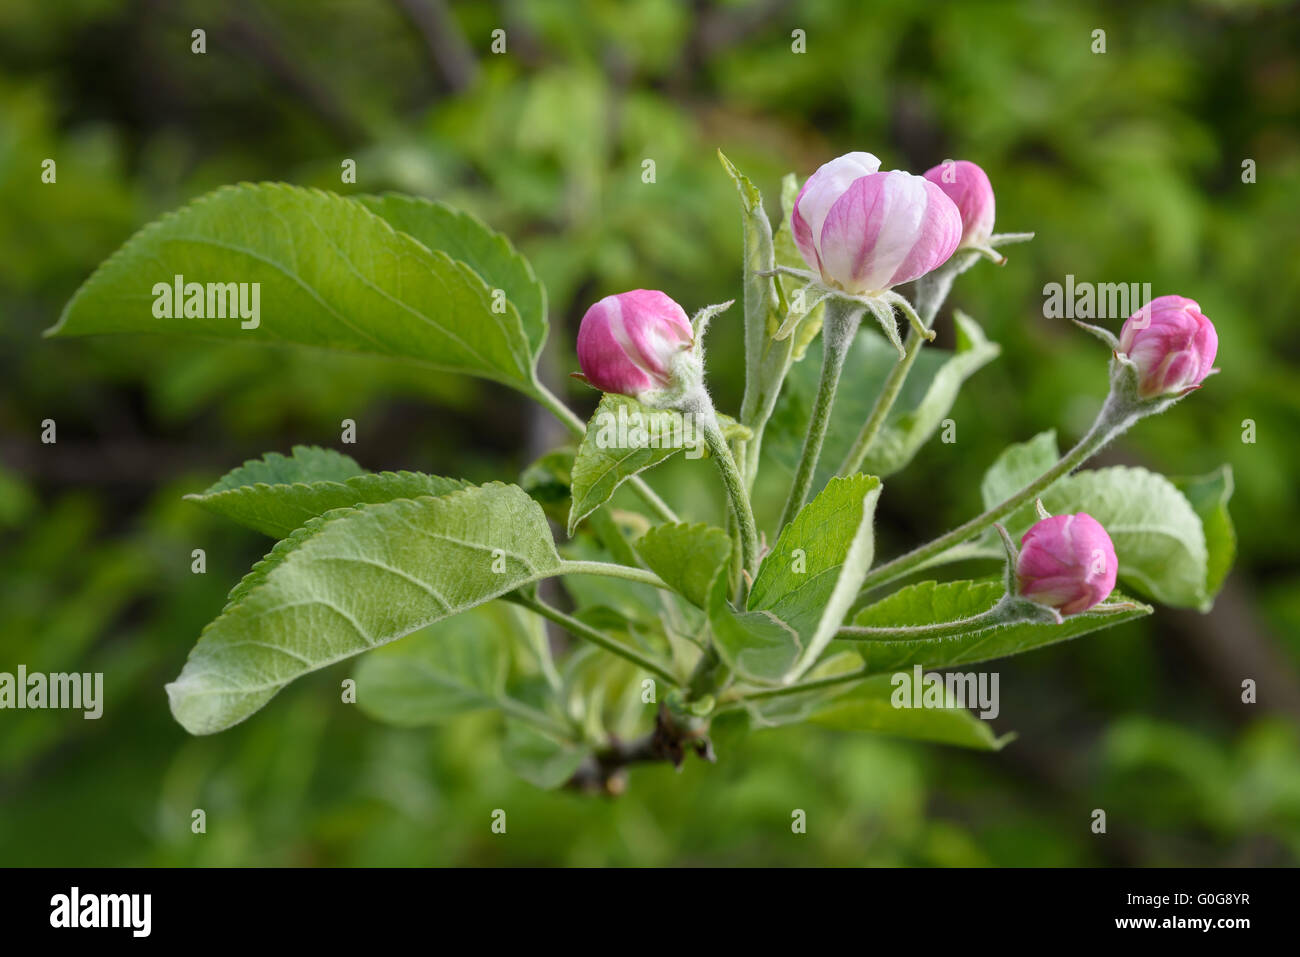 Apple Flowers with buds  on a blurred background Stock Photo